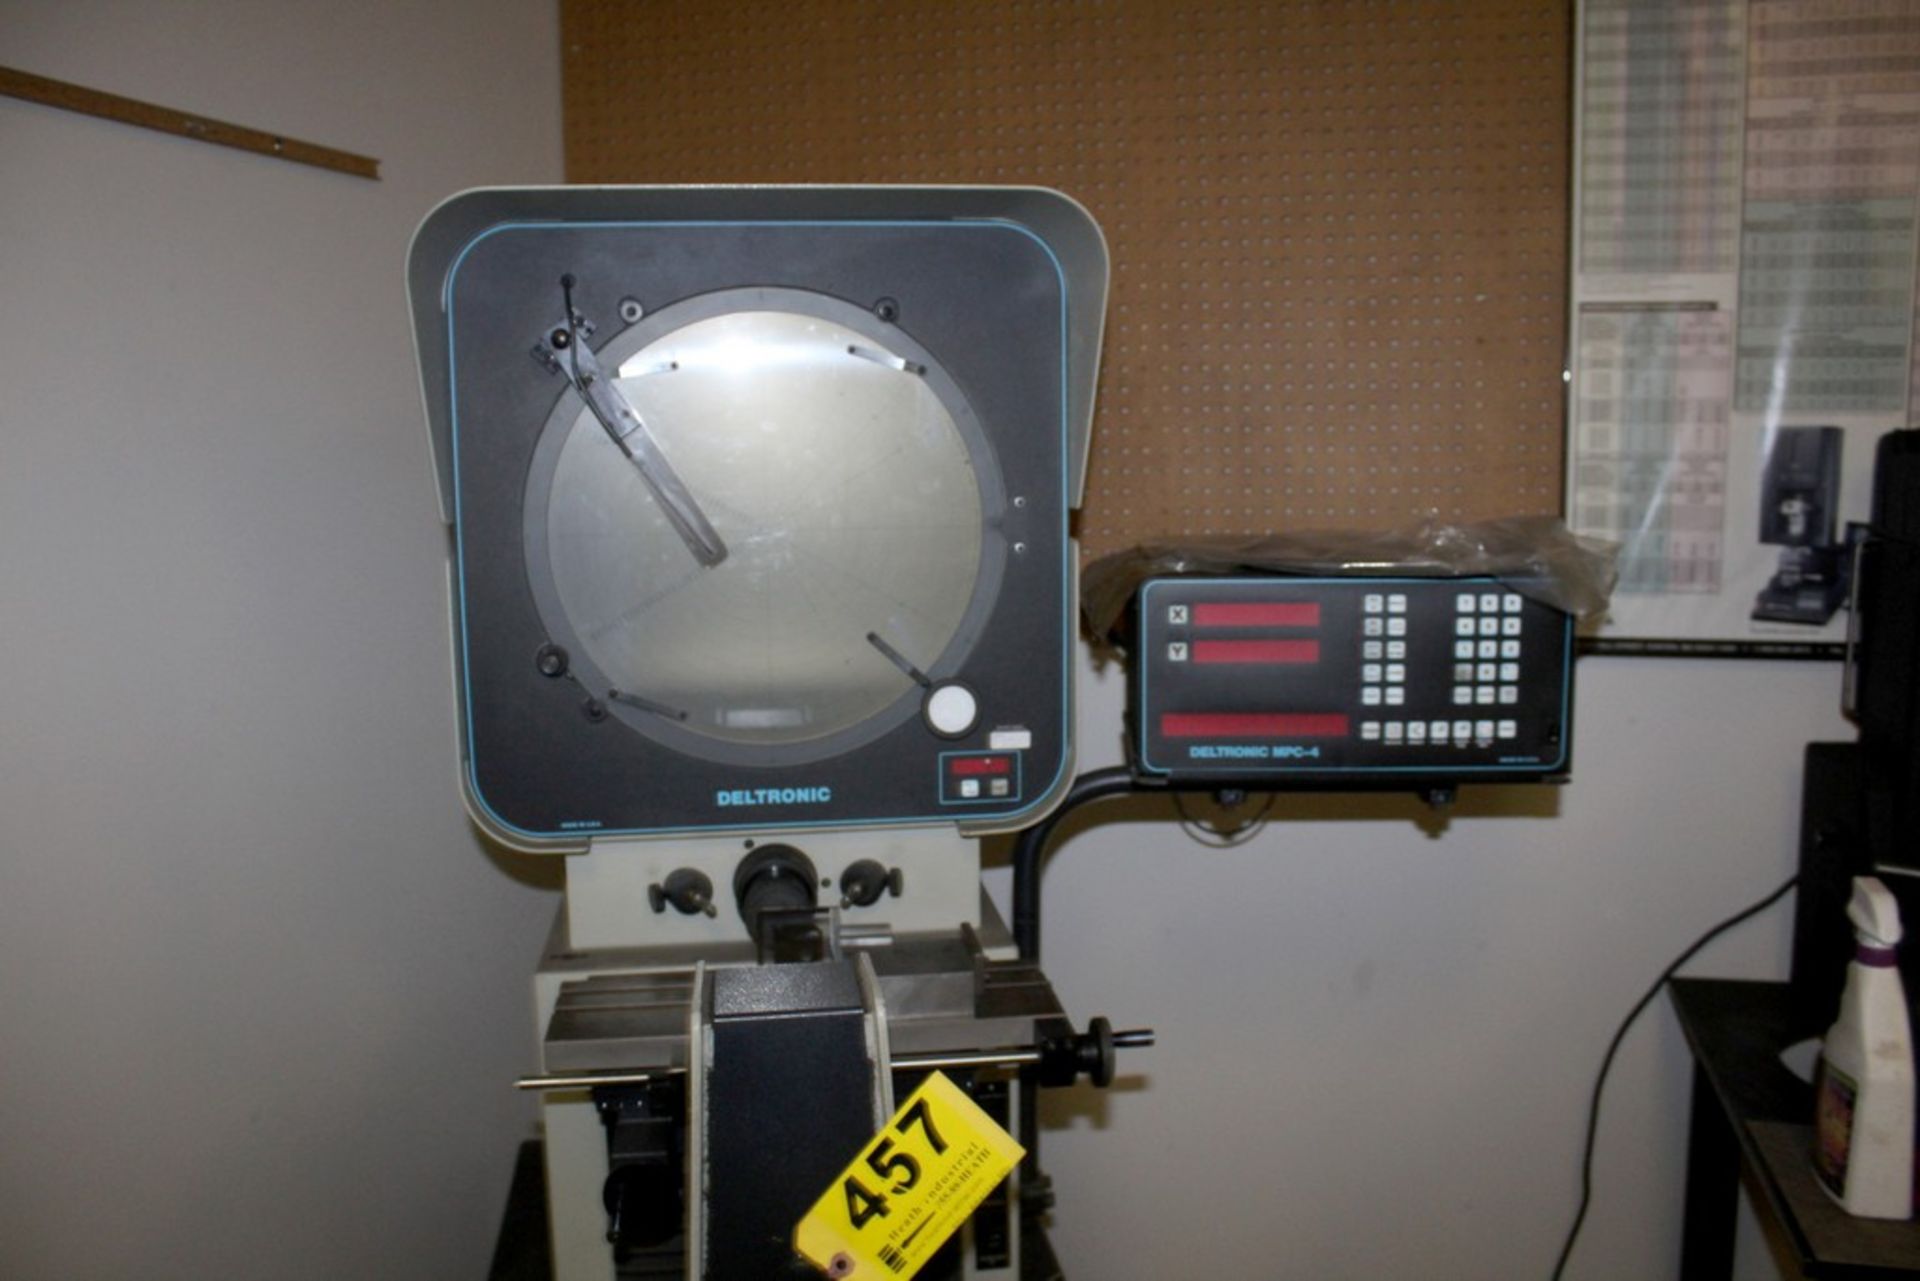 DELTRONIC 14” MODEL DH214 OPTICAL COMPARATORS, S/N 229062846, WITH MPC-4 DRO - Image 2 of 4